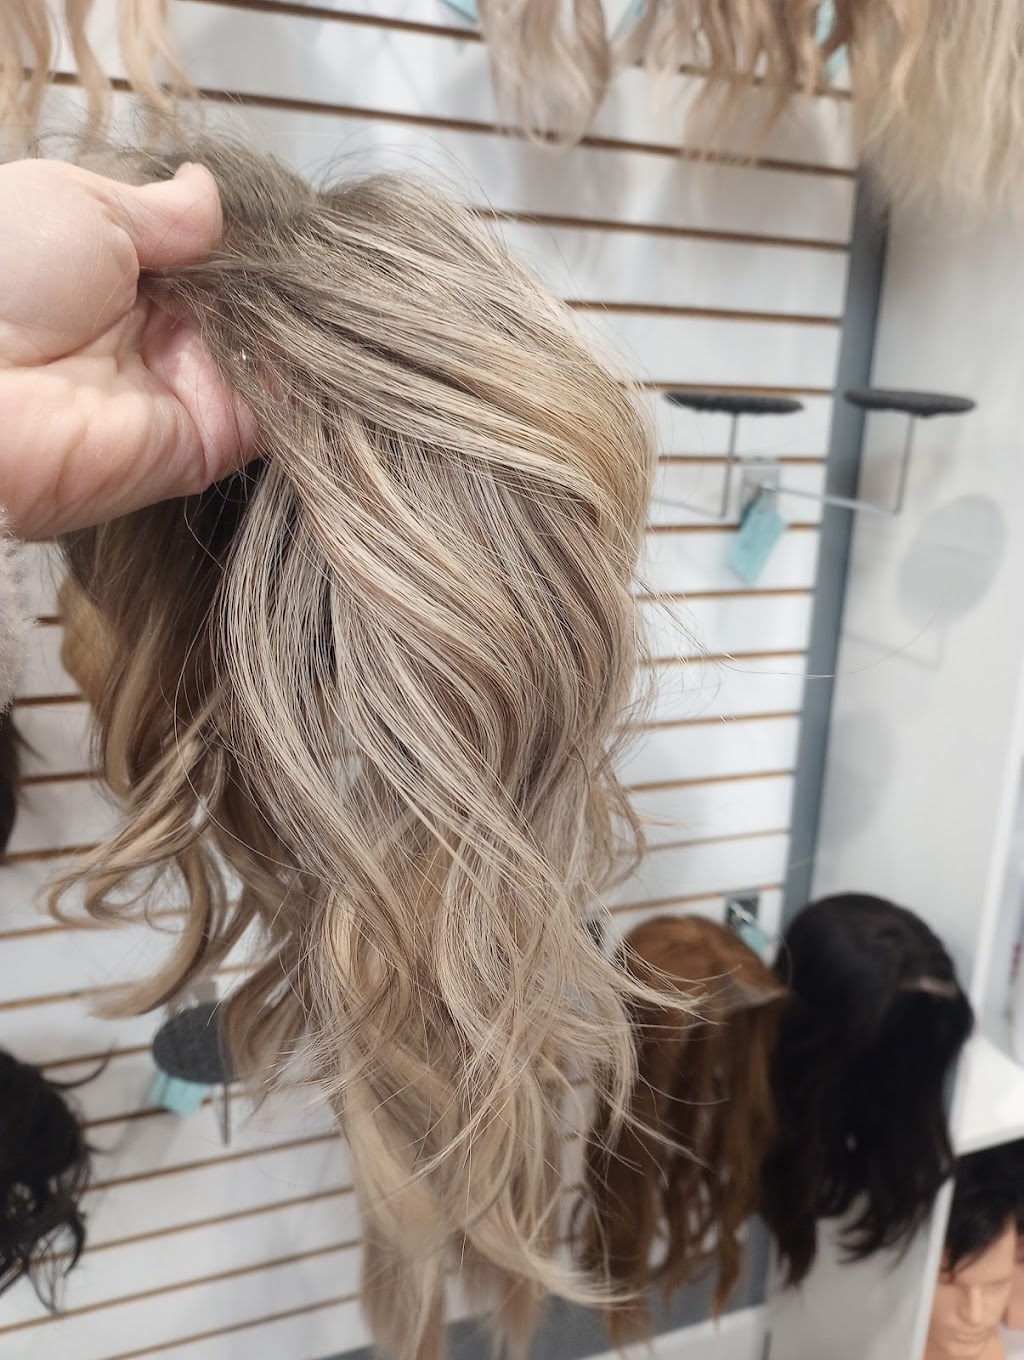 Main Street Hair Solutions & Wigs Woodbury | Within Salons by JC By Appointment only, 8160 Coller Way #9, Woodbury, MN 55125, USA | Phone: (651) 329-0249